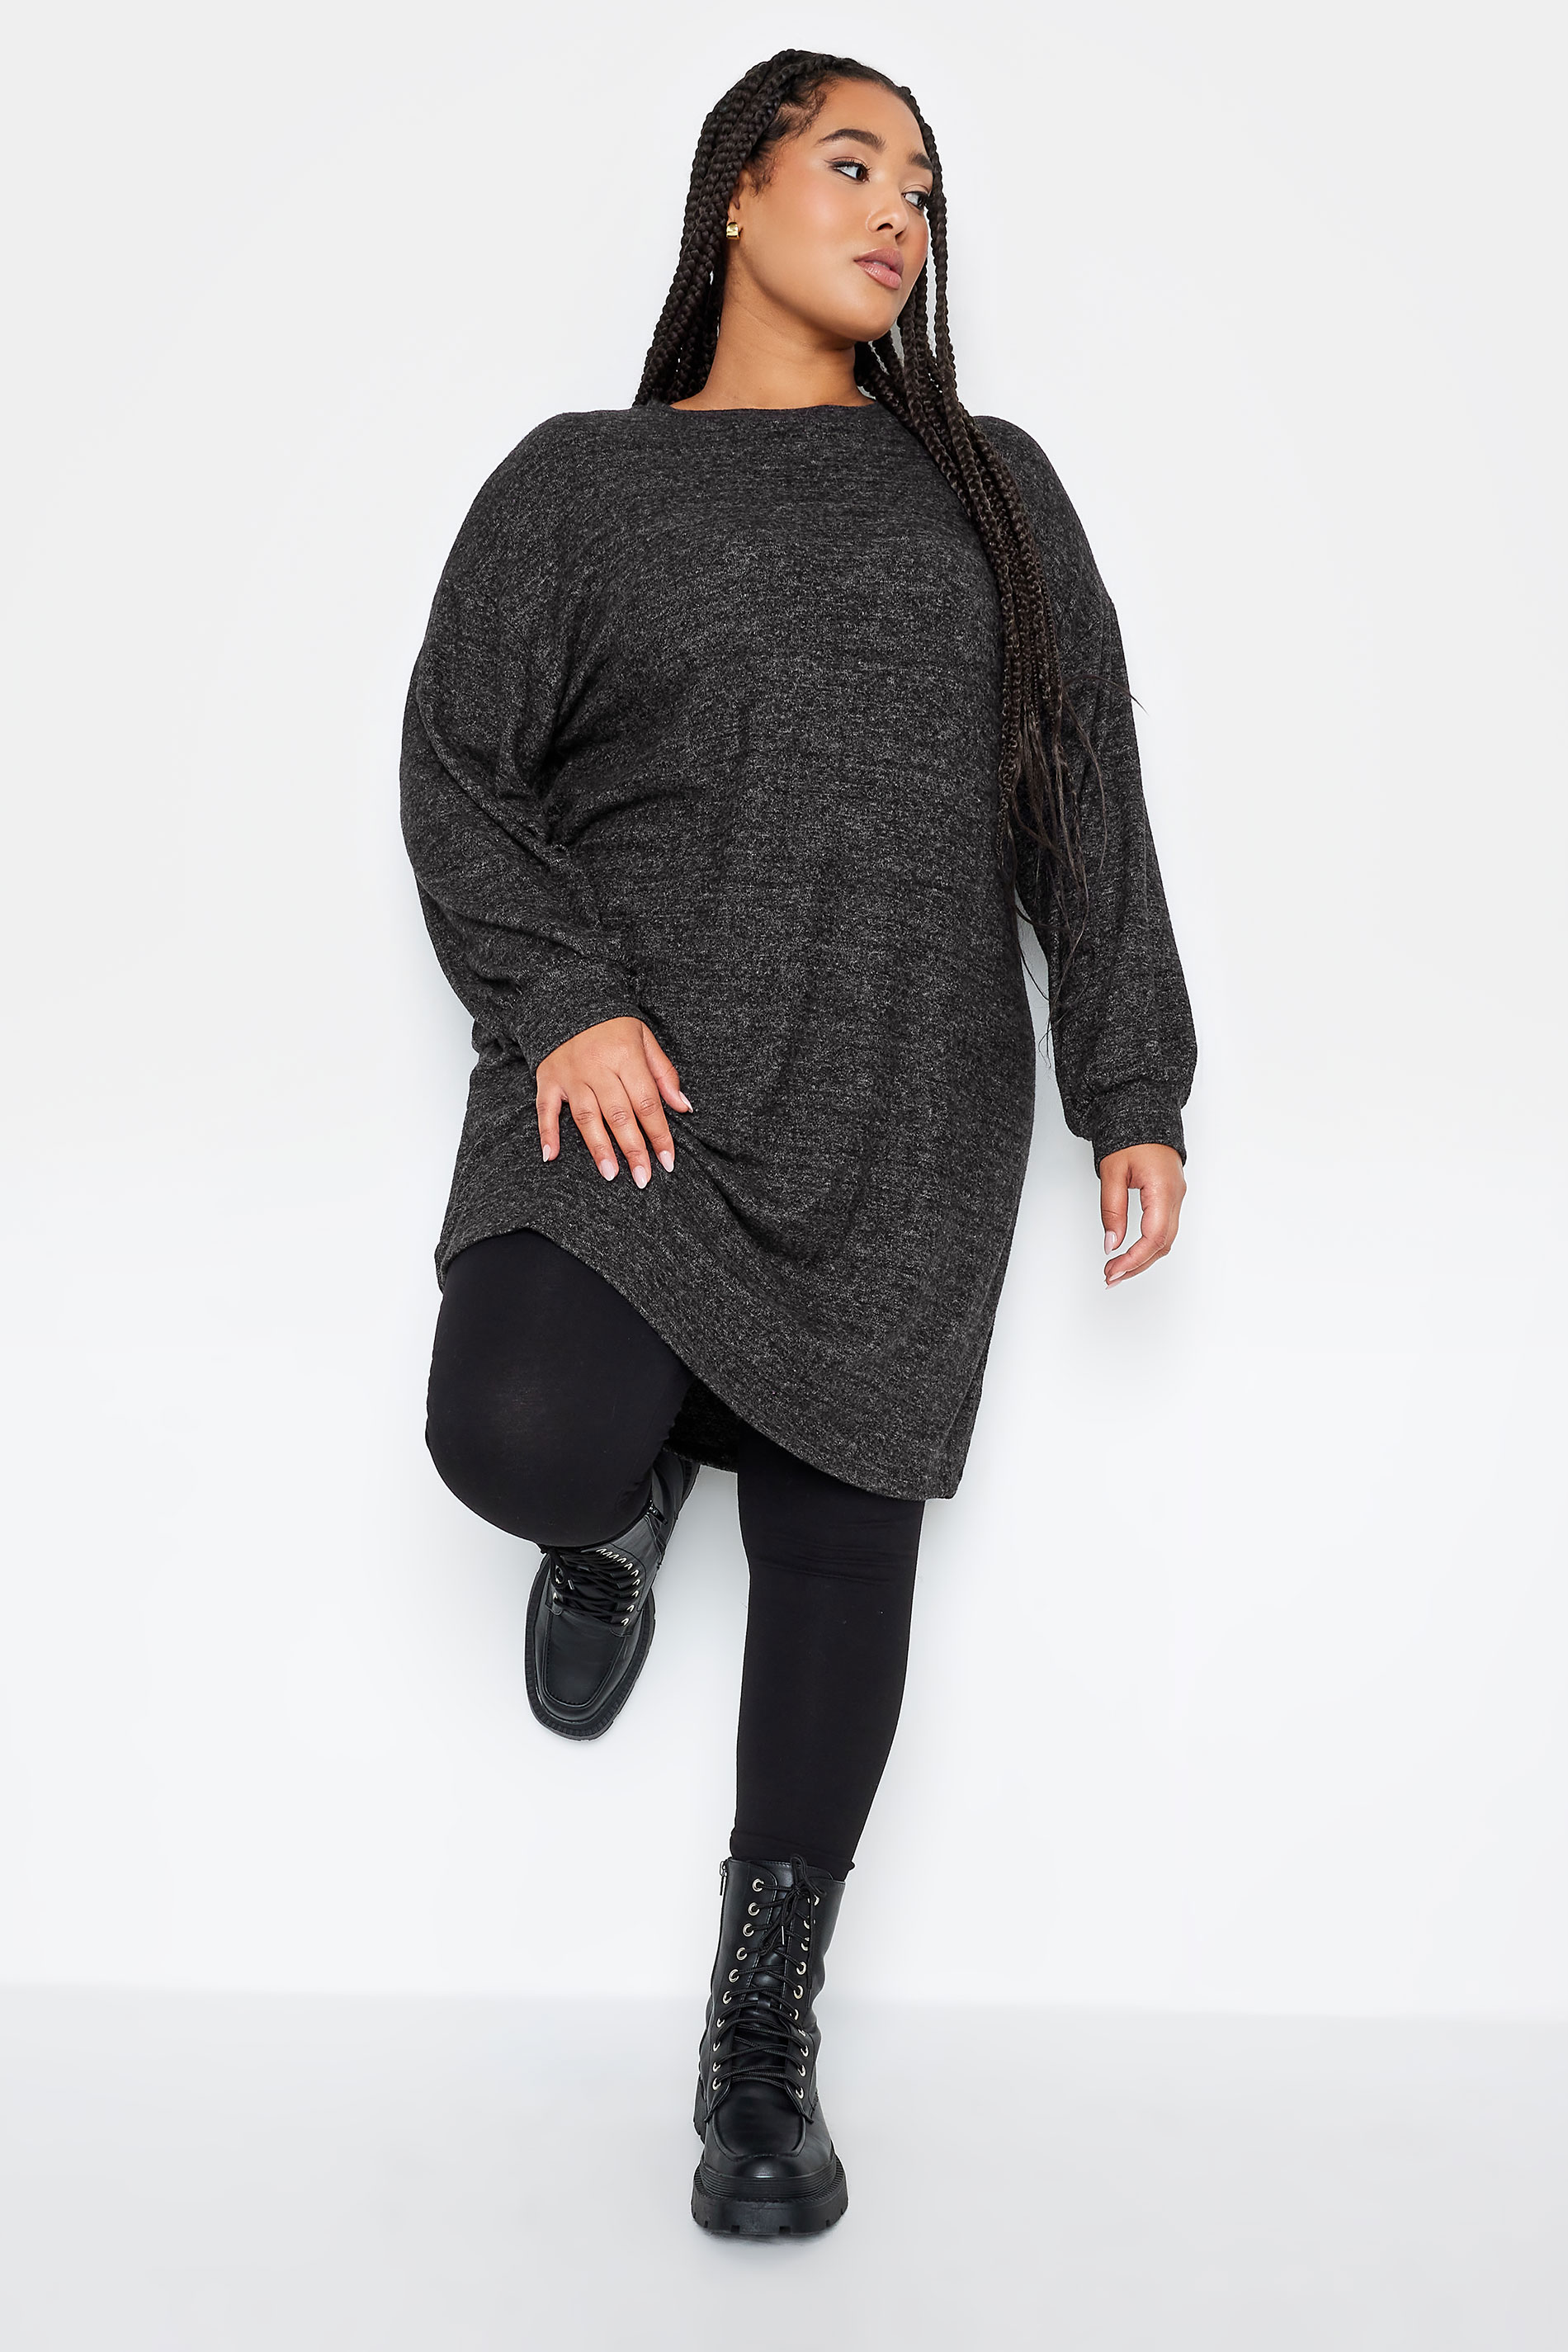 YOURS Plus Size Dark Grey Soft Touch Midi Dress | Yours Clothing 2